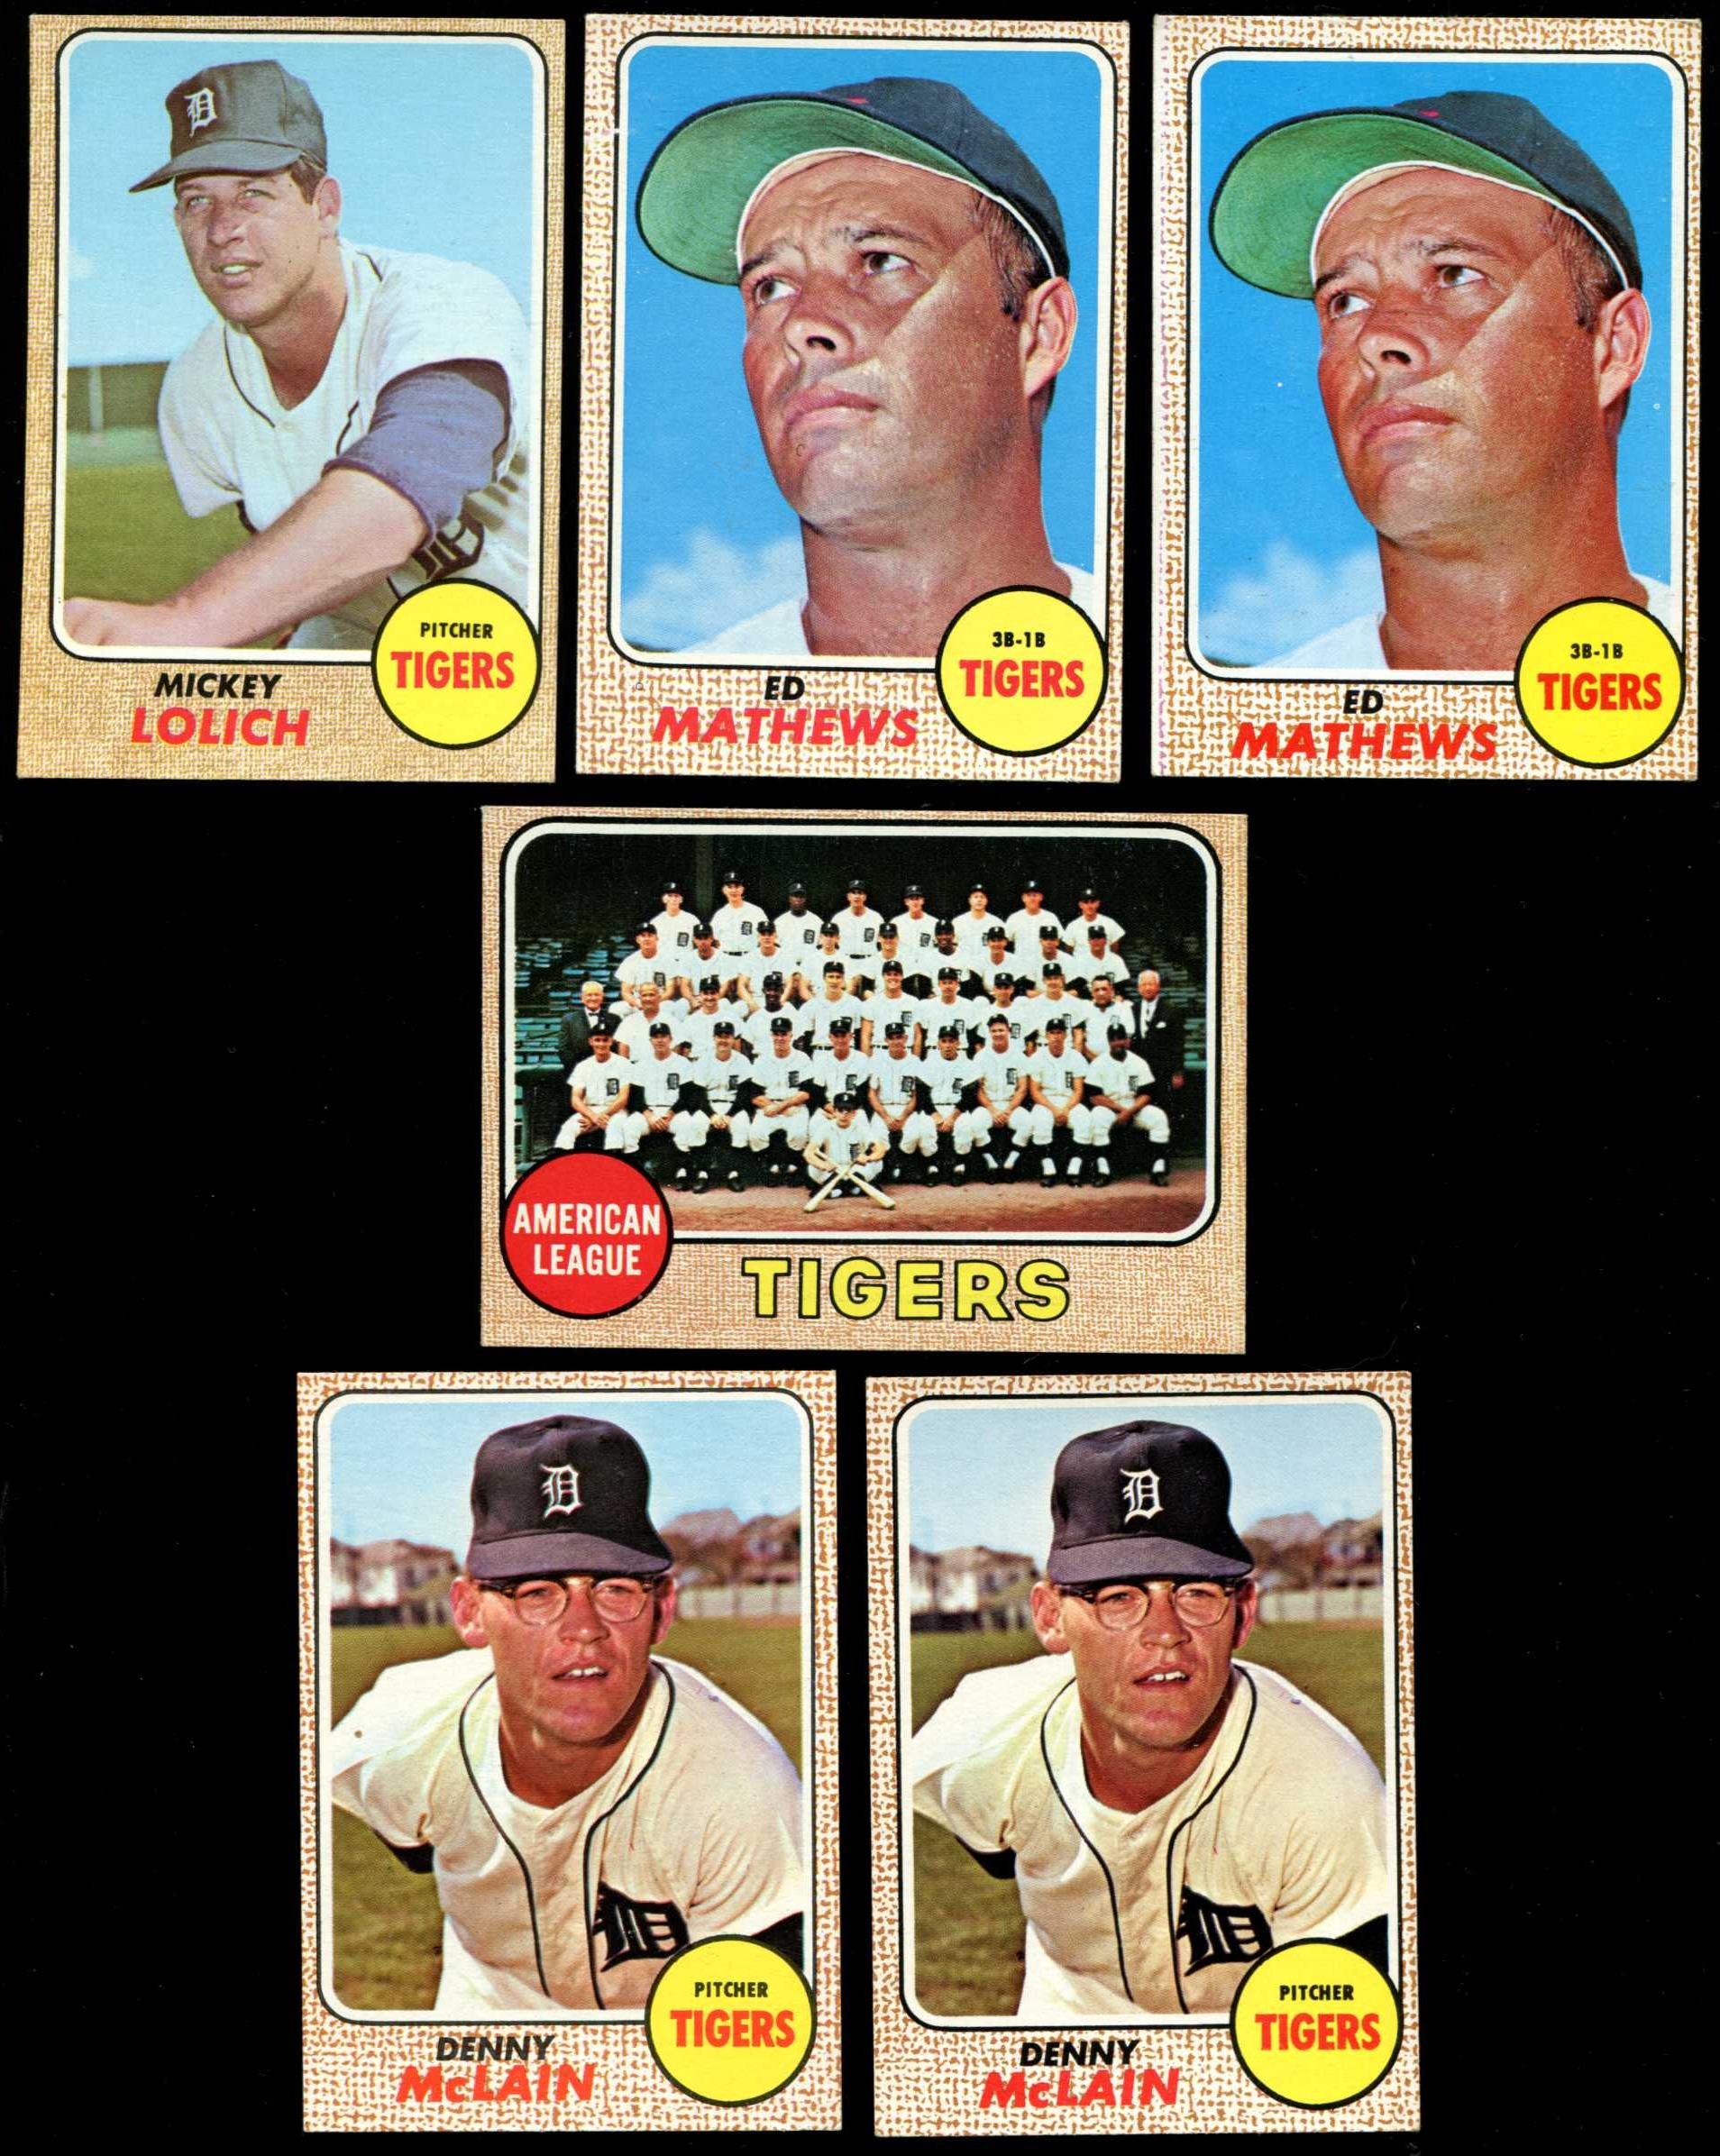 1968 Topps #414 Mickey Lolich (Tigers)